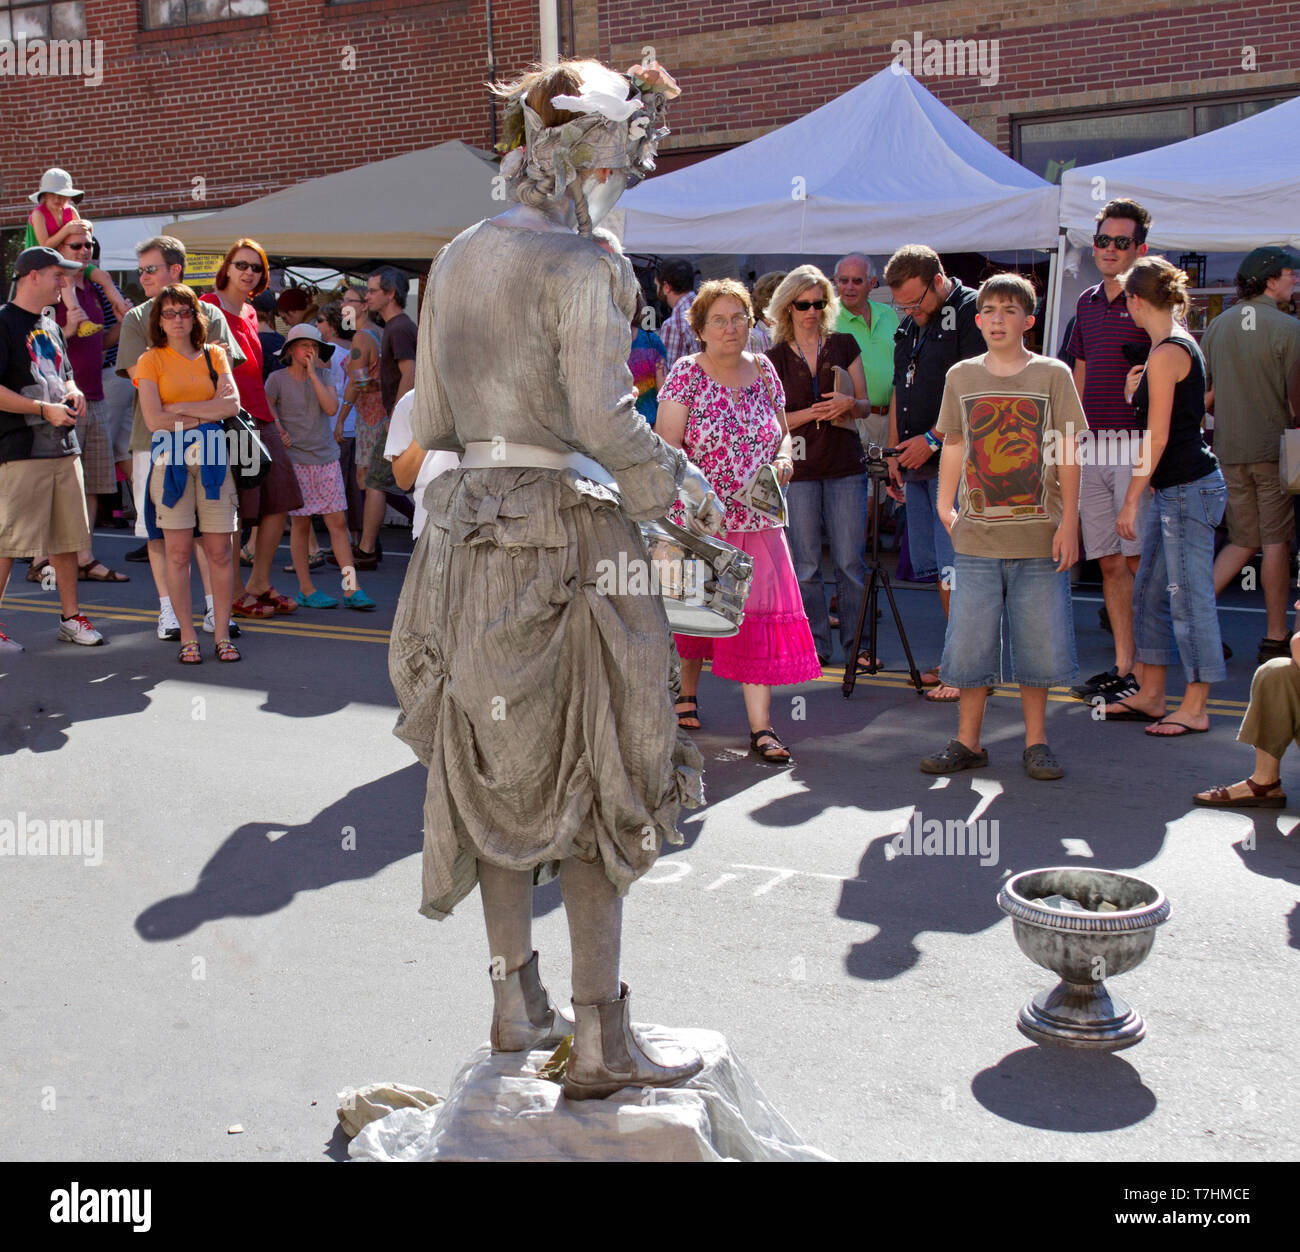 ASHEVILLE, NORTH CAROLINA, USA – 9/5/2010: An amazing and popular human statue, a busker known as the Silver Drummer Girl, entertains crowds in the st Stock Photo